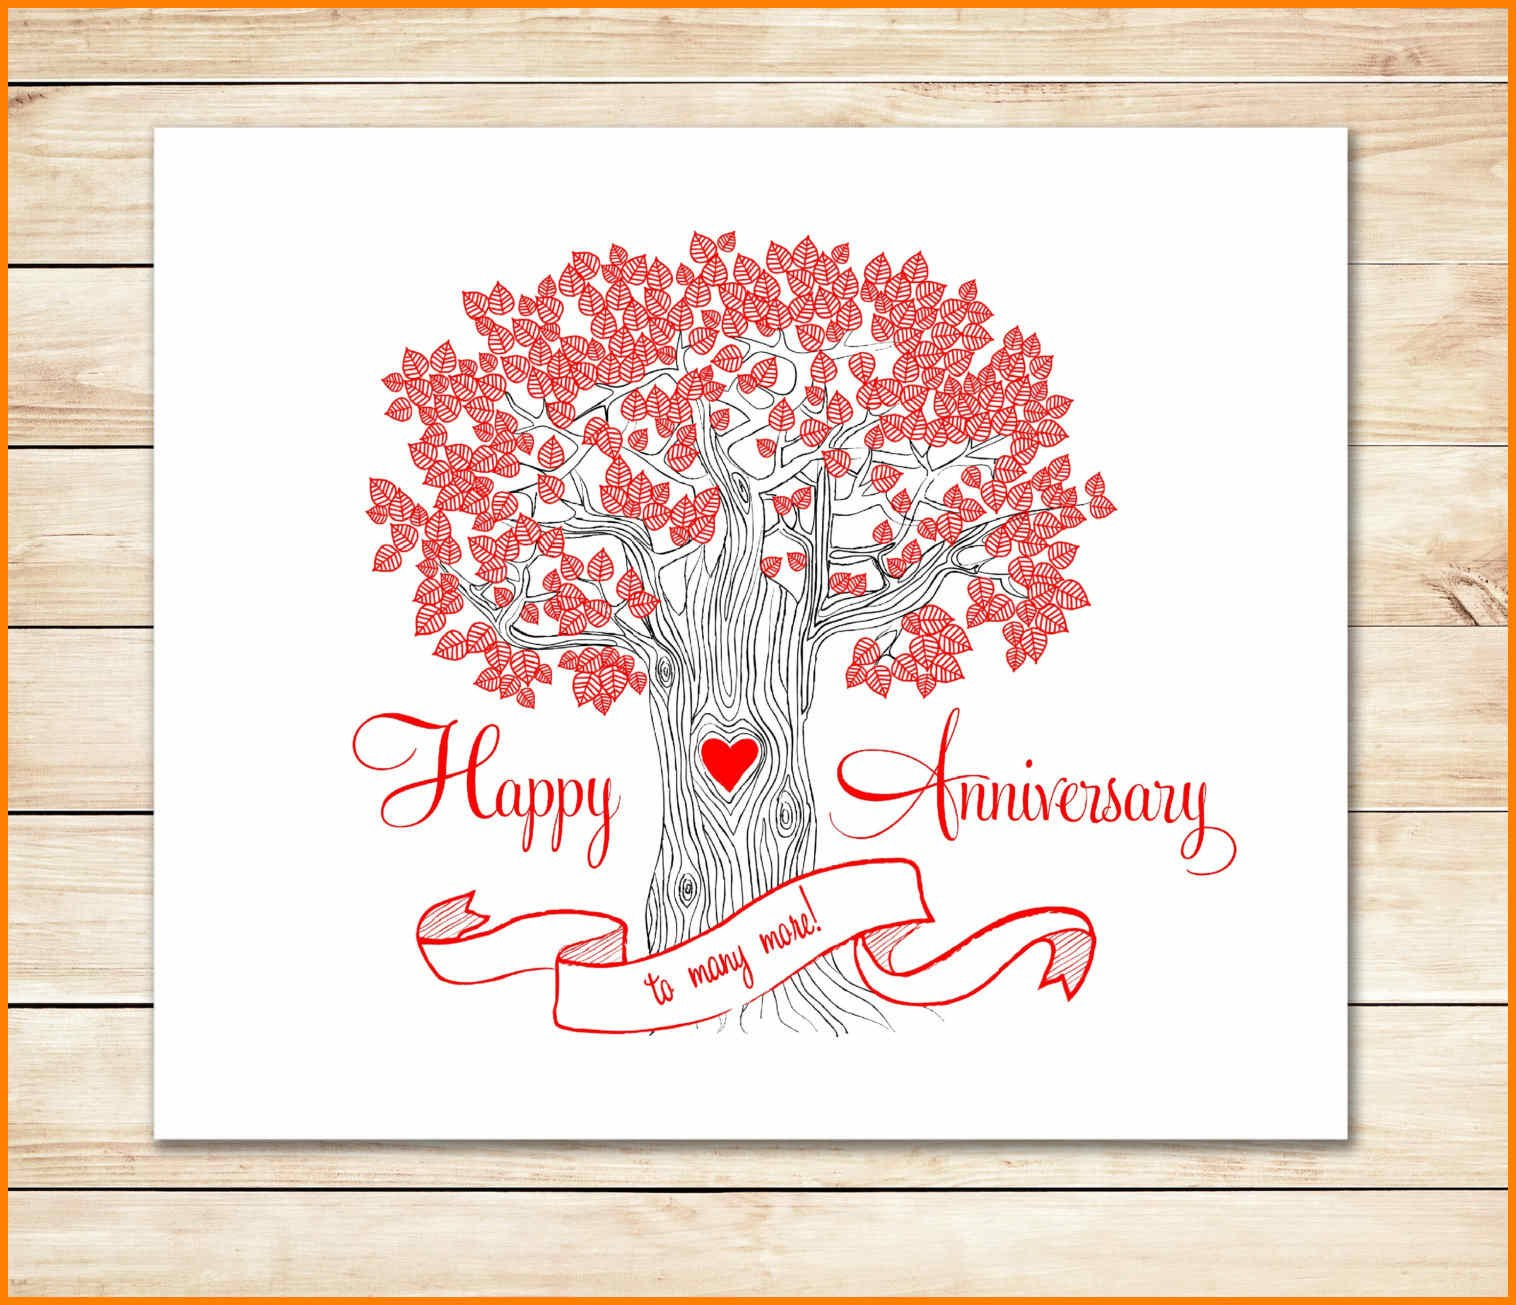 Happy Anniversary Templates Free  Plasticmouldings regarding Template For Anniversary Card